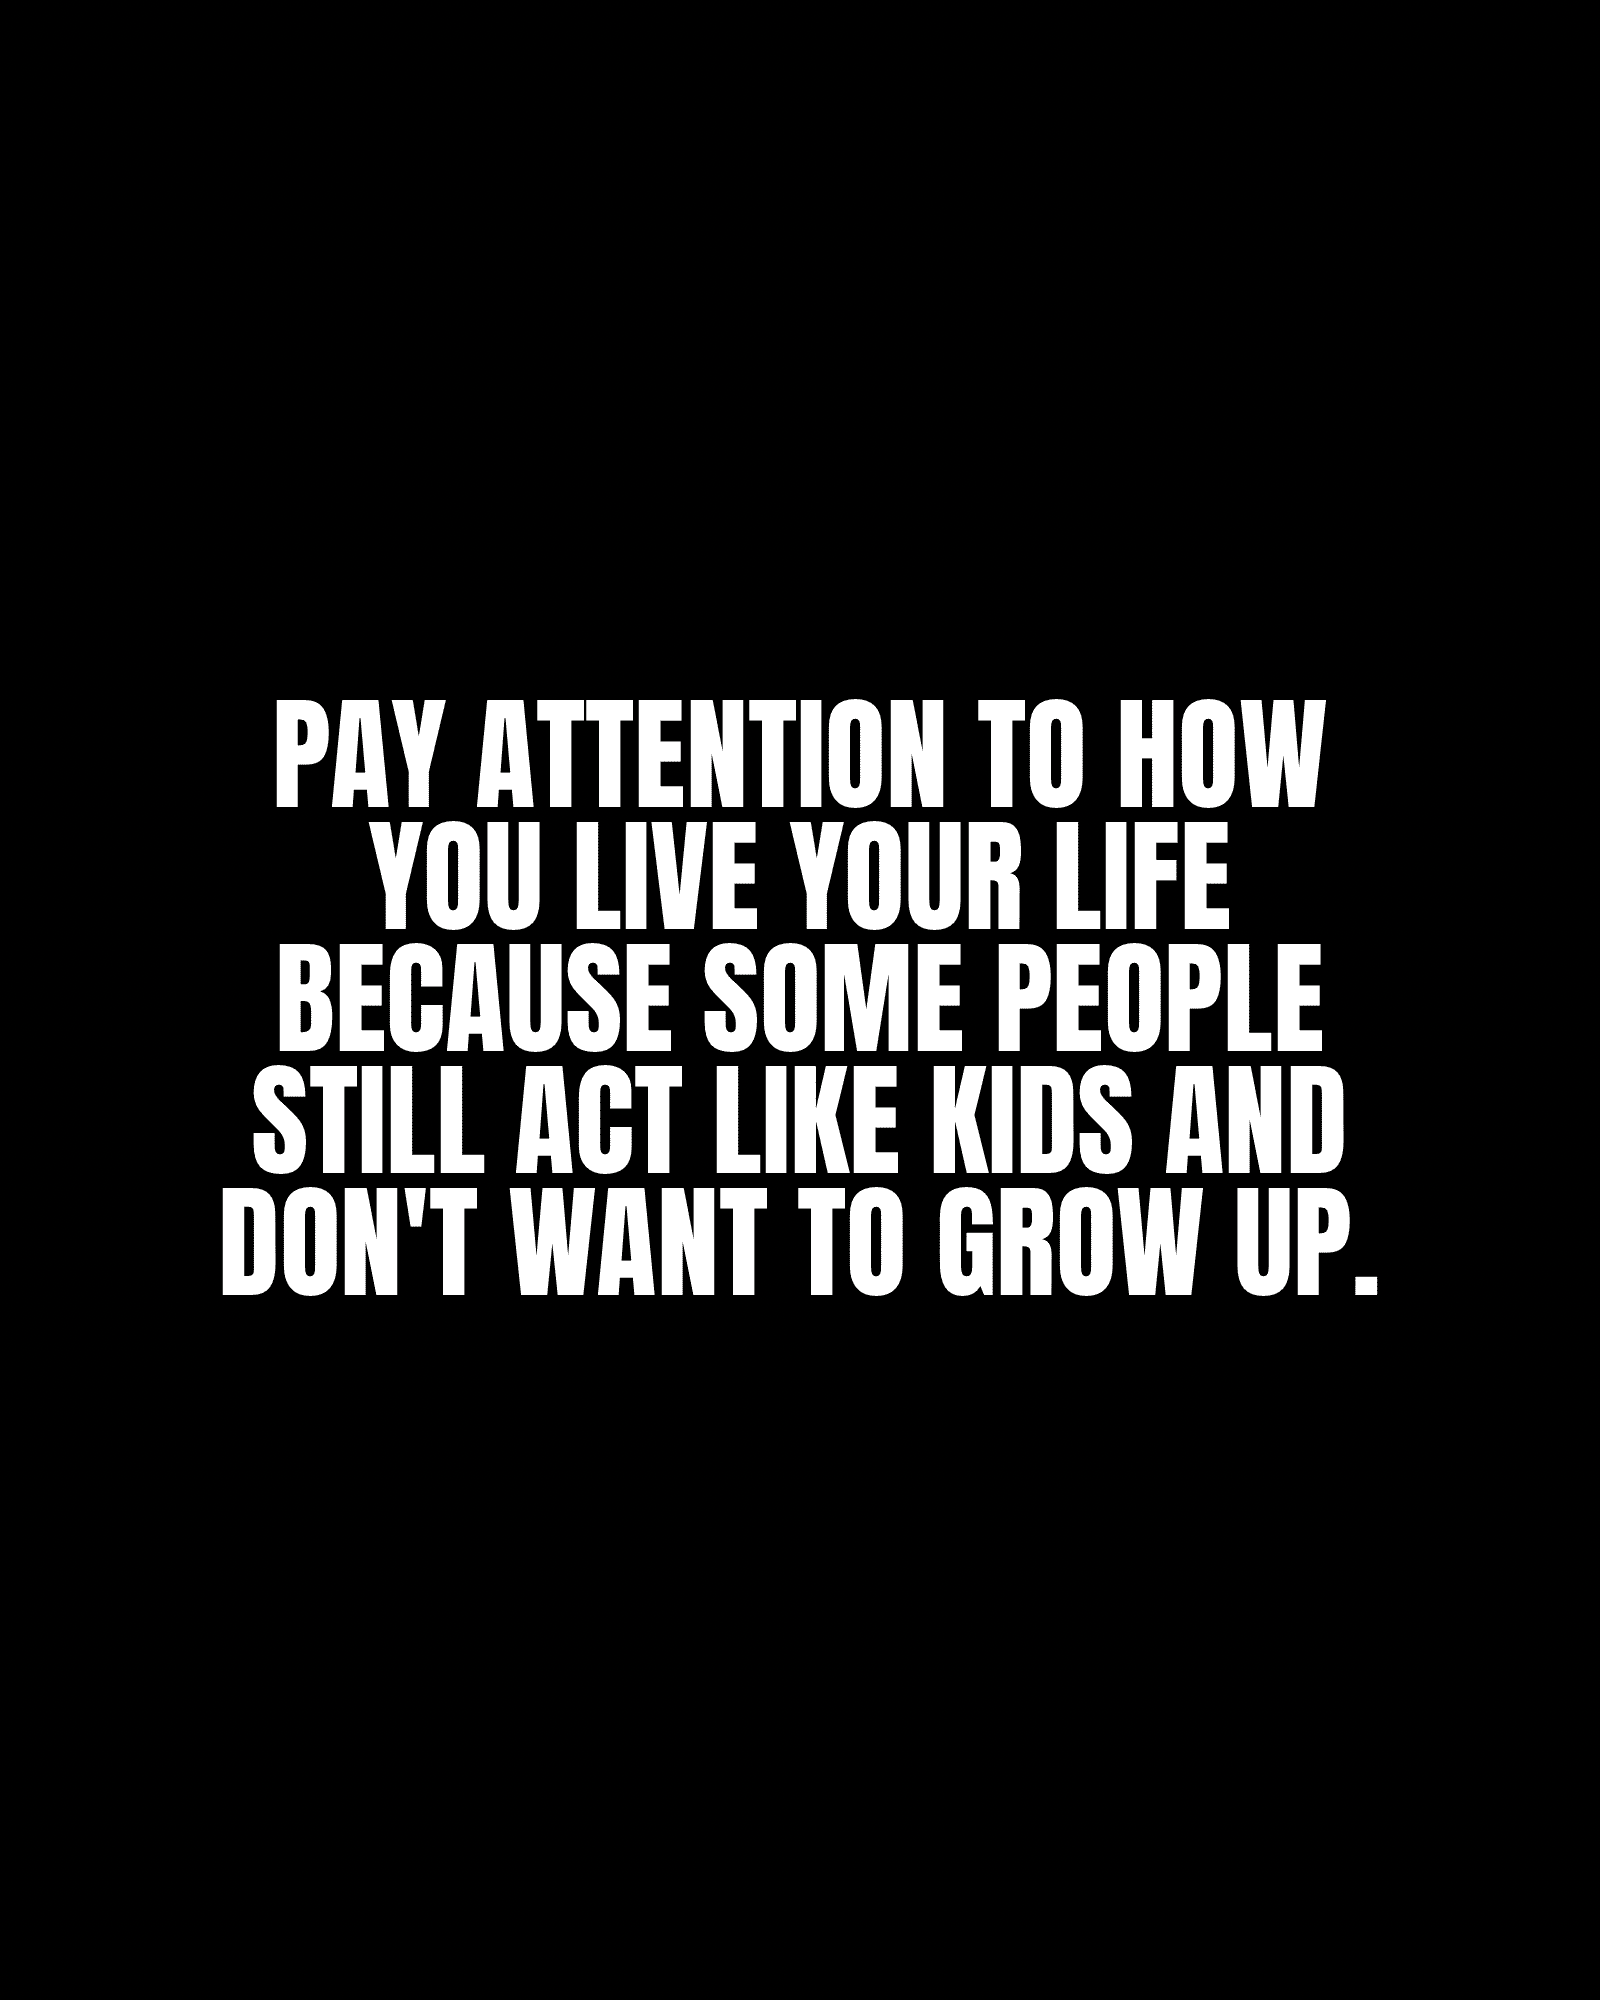 Pay attention to how you live your life because some people still act like kids and don’t want to grow up.